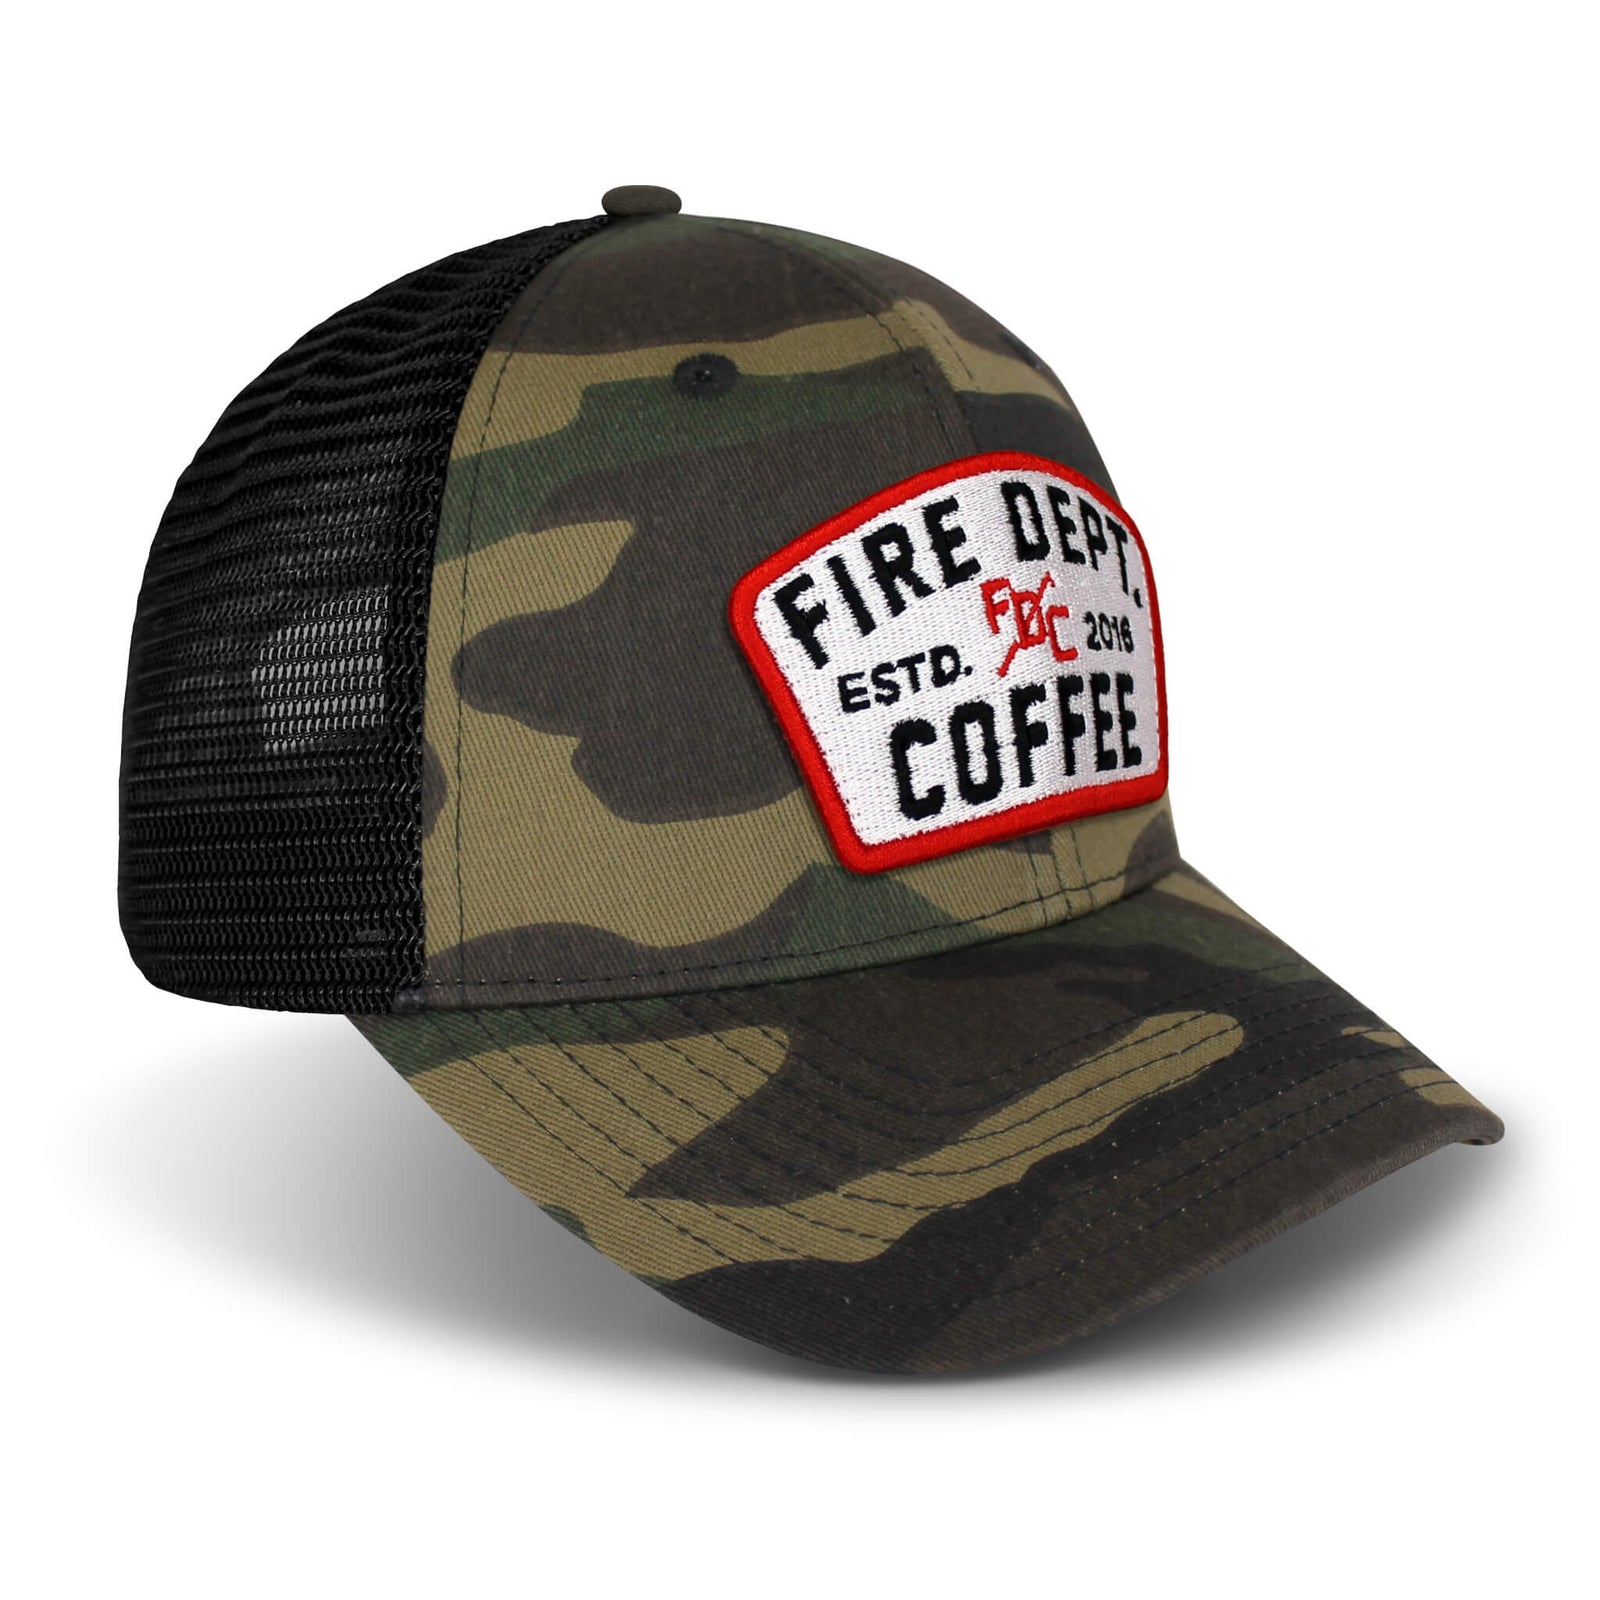 Camouflage hat with black mesh back and a Fire Department Coffee keystone patch on the front